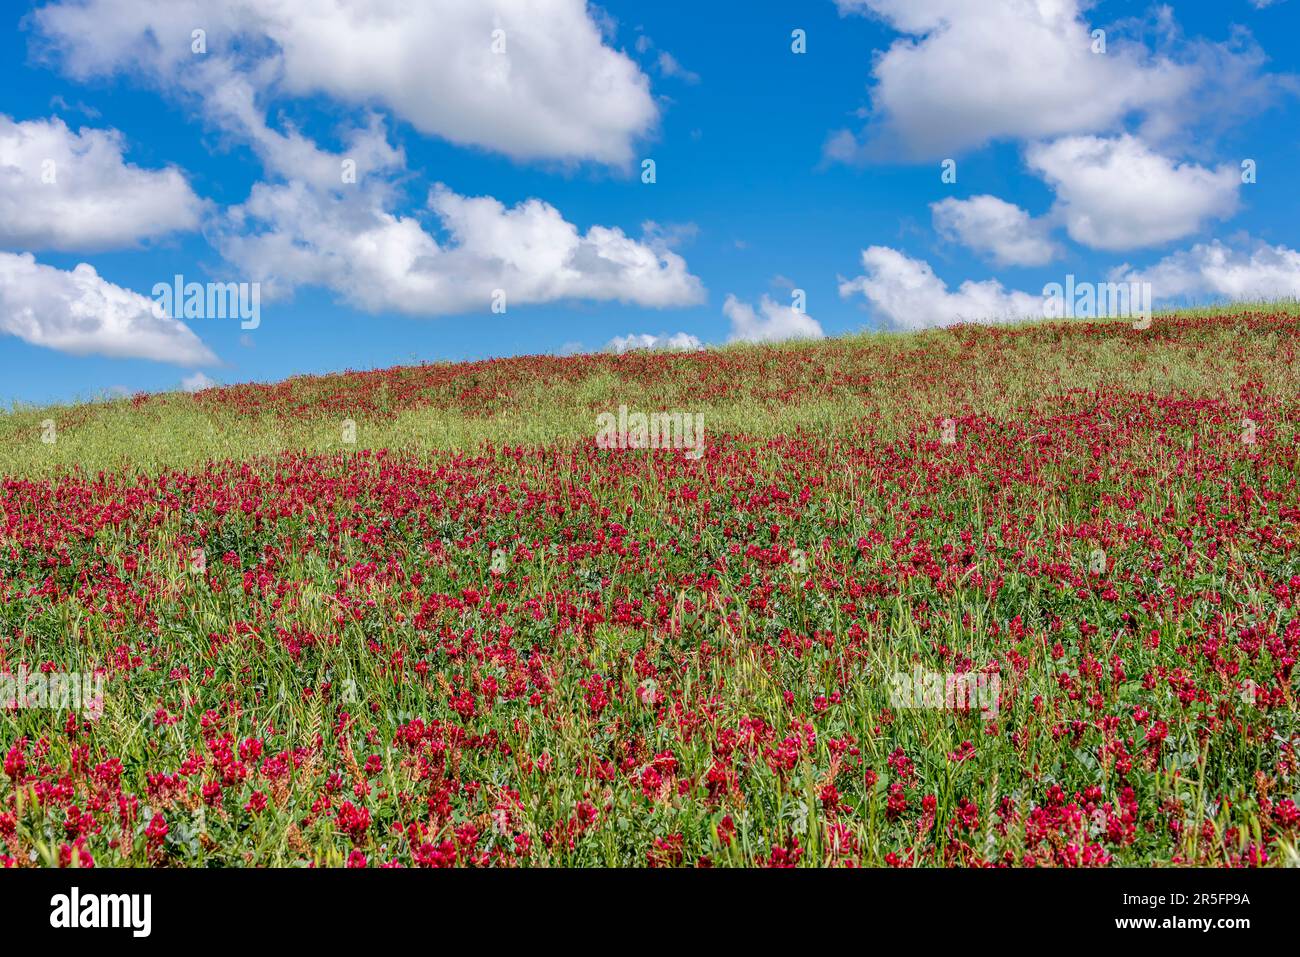 A hillside covered in the red flowers of Hedysarum coronarium, commonly called French honeysuckle, in the Tuscan countryside, near Orciano Pisano, Ita Stock Photo